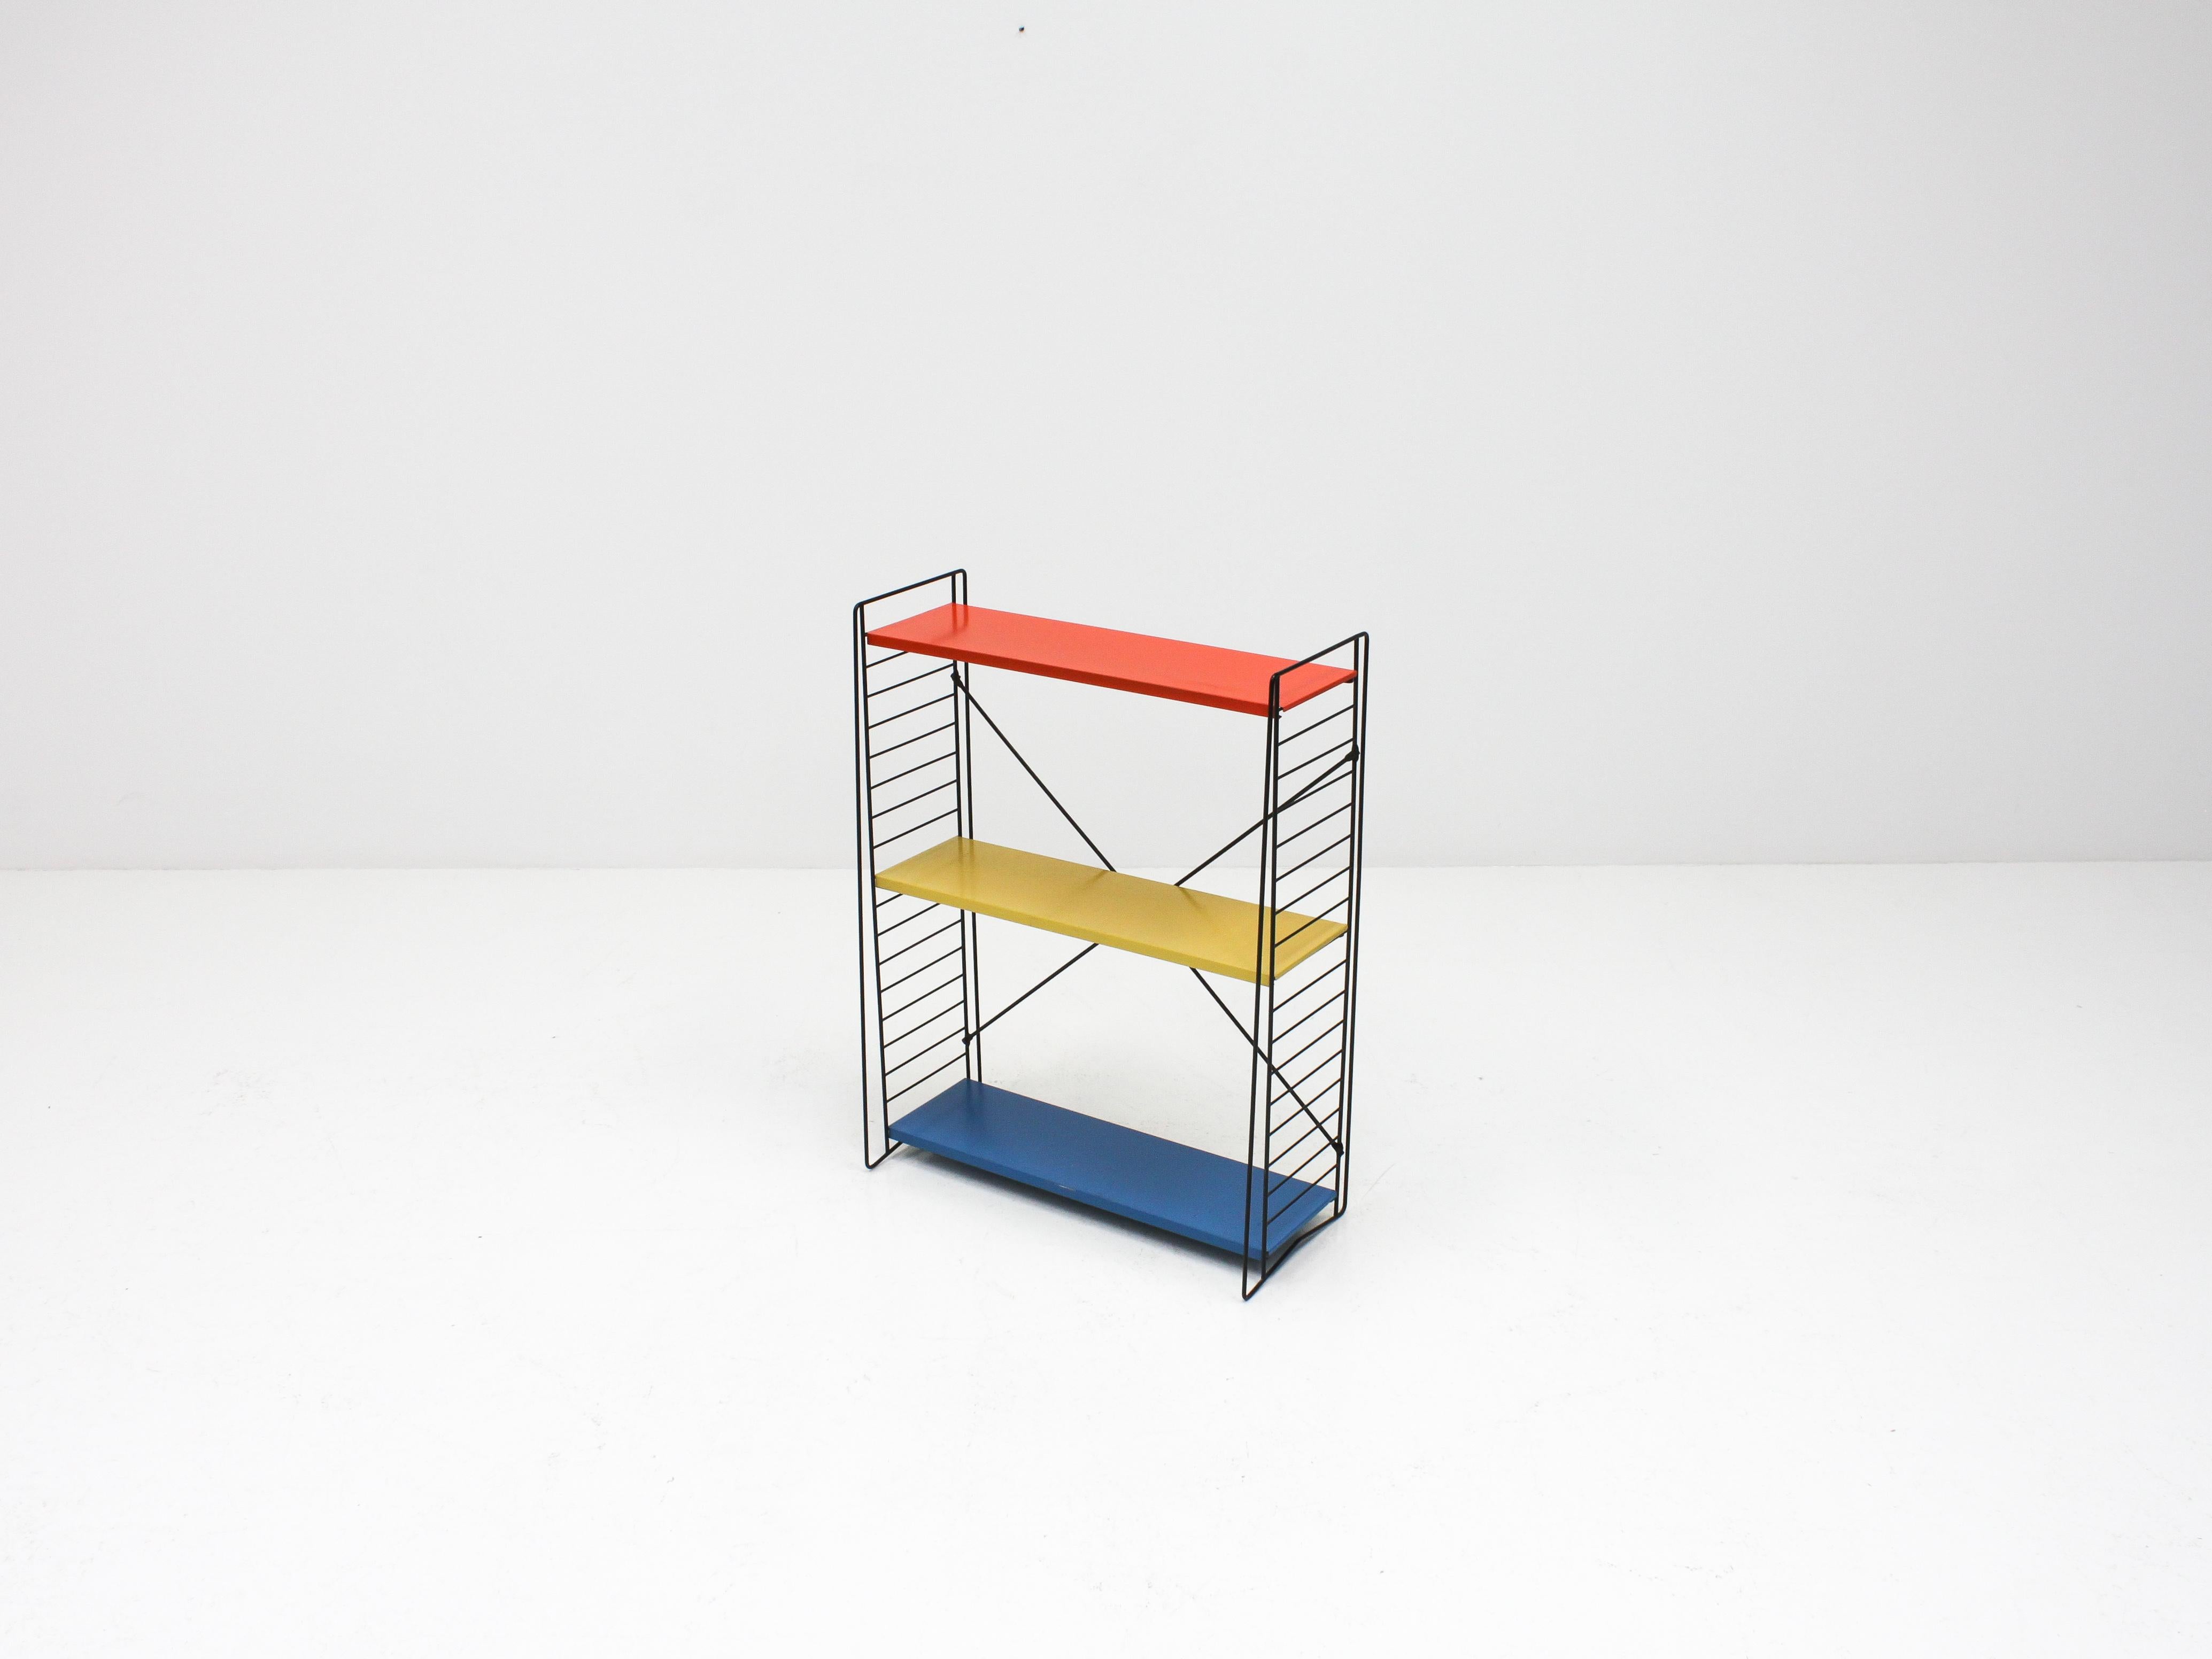 A set of vintage Tomado freestanding shelving/book racks, designed mid-1950s by A. Dekker and manufactured in the Netherlands.

Powder-coated frame and adjustable steel shelves. This design looks amazing in any room and location, the freestanding